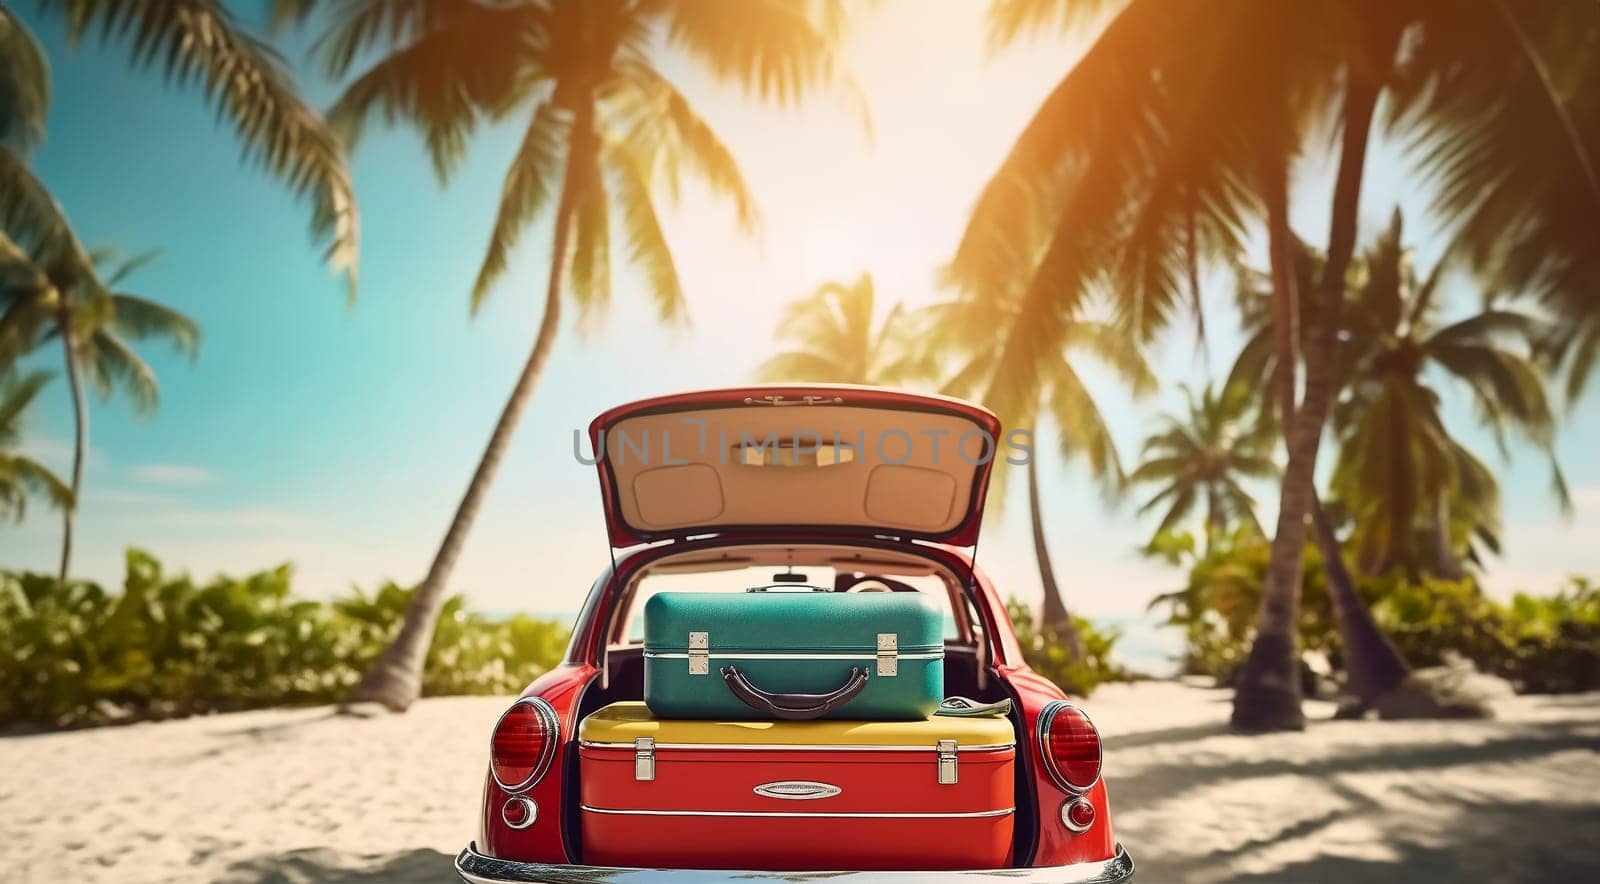 Summer Travel Time Overloaded Luggage. Baggages in the car for travel concept. Suitcases Holiday Concept Adventure Trip. Copy space Space for text